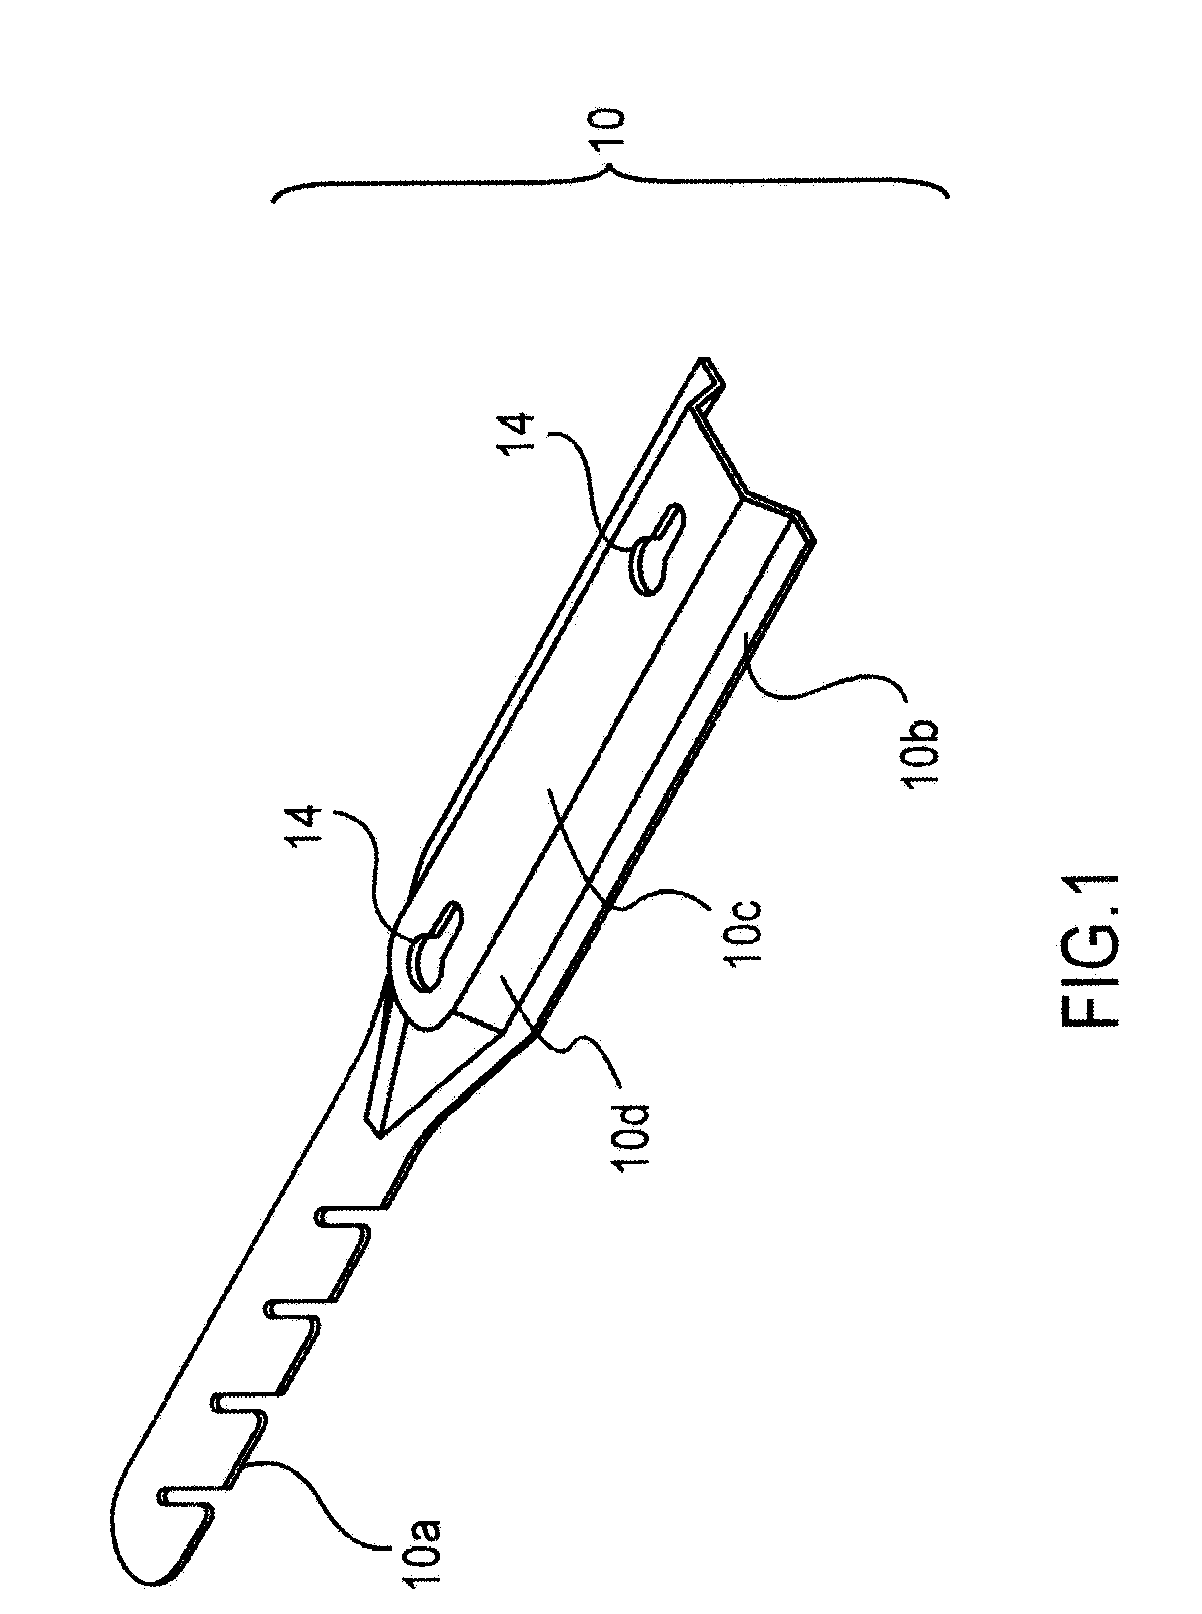 Roofing bracket for supporting a platform